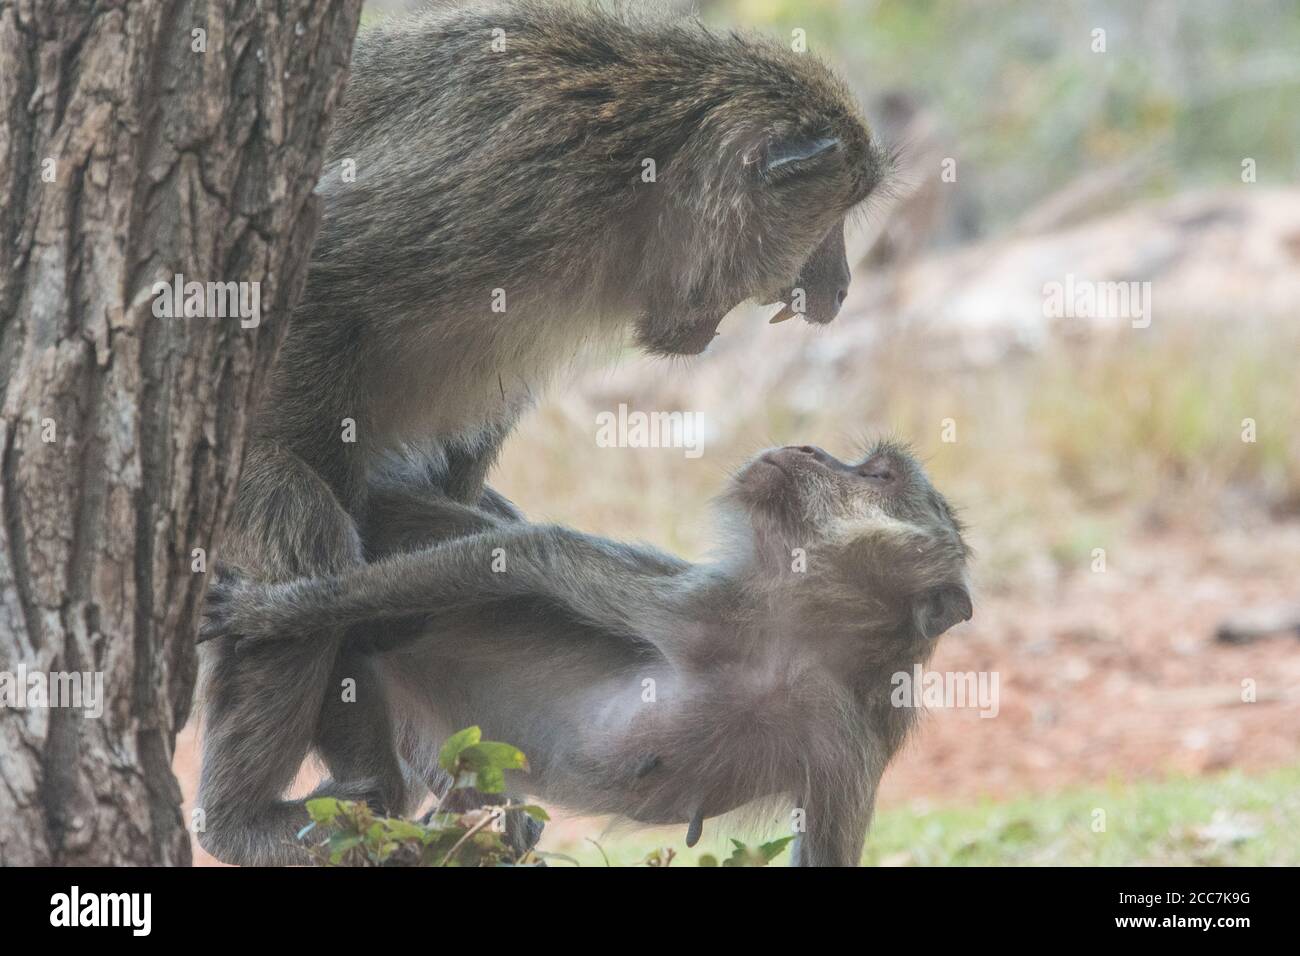 A male and female crab eating macaque (Macaca fascicularis) mating and the male snarls at the female. In Komodo National Park, Indonesia. Stock Photo